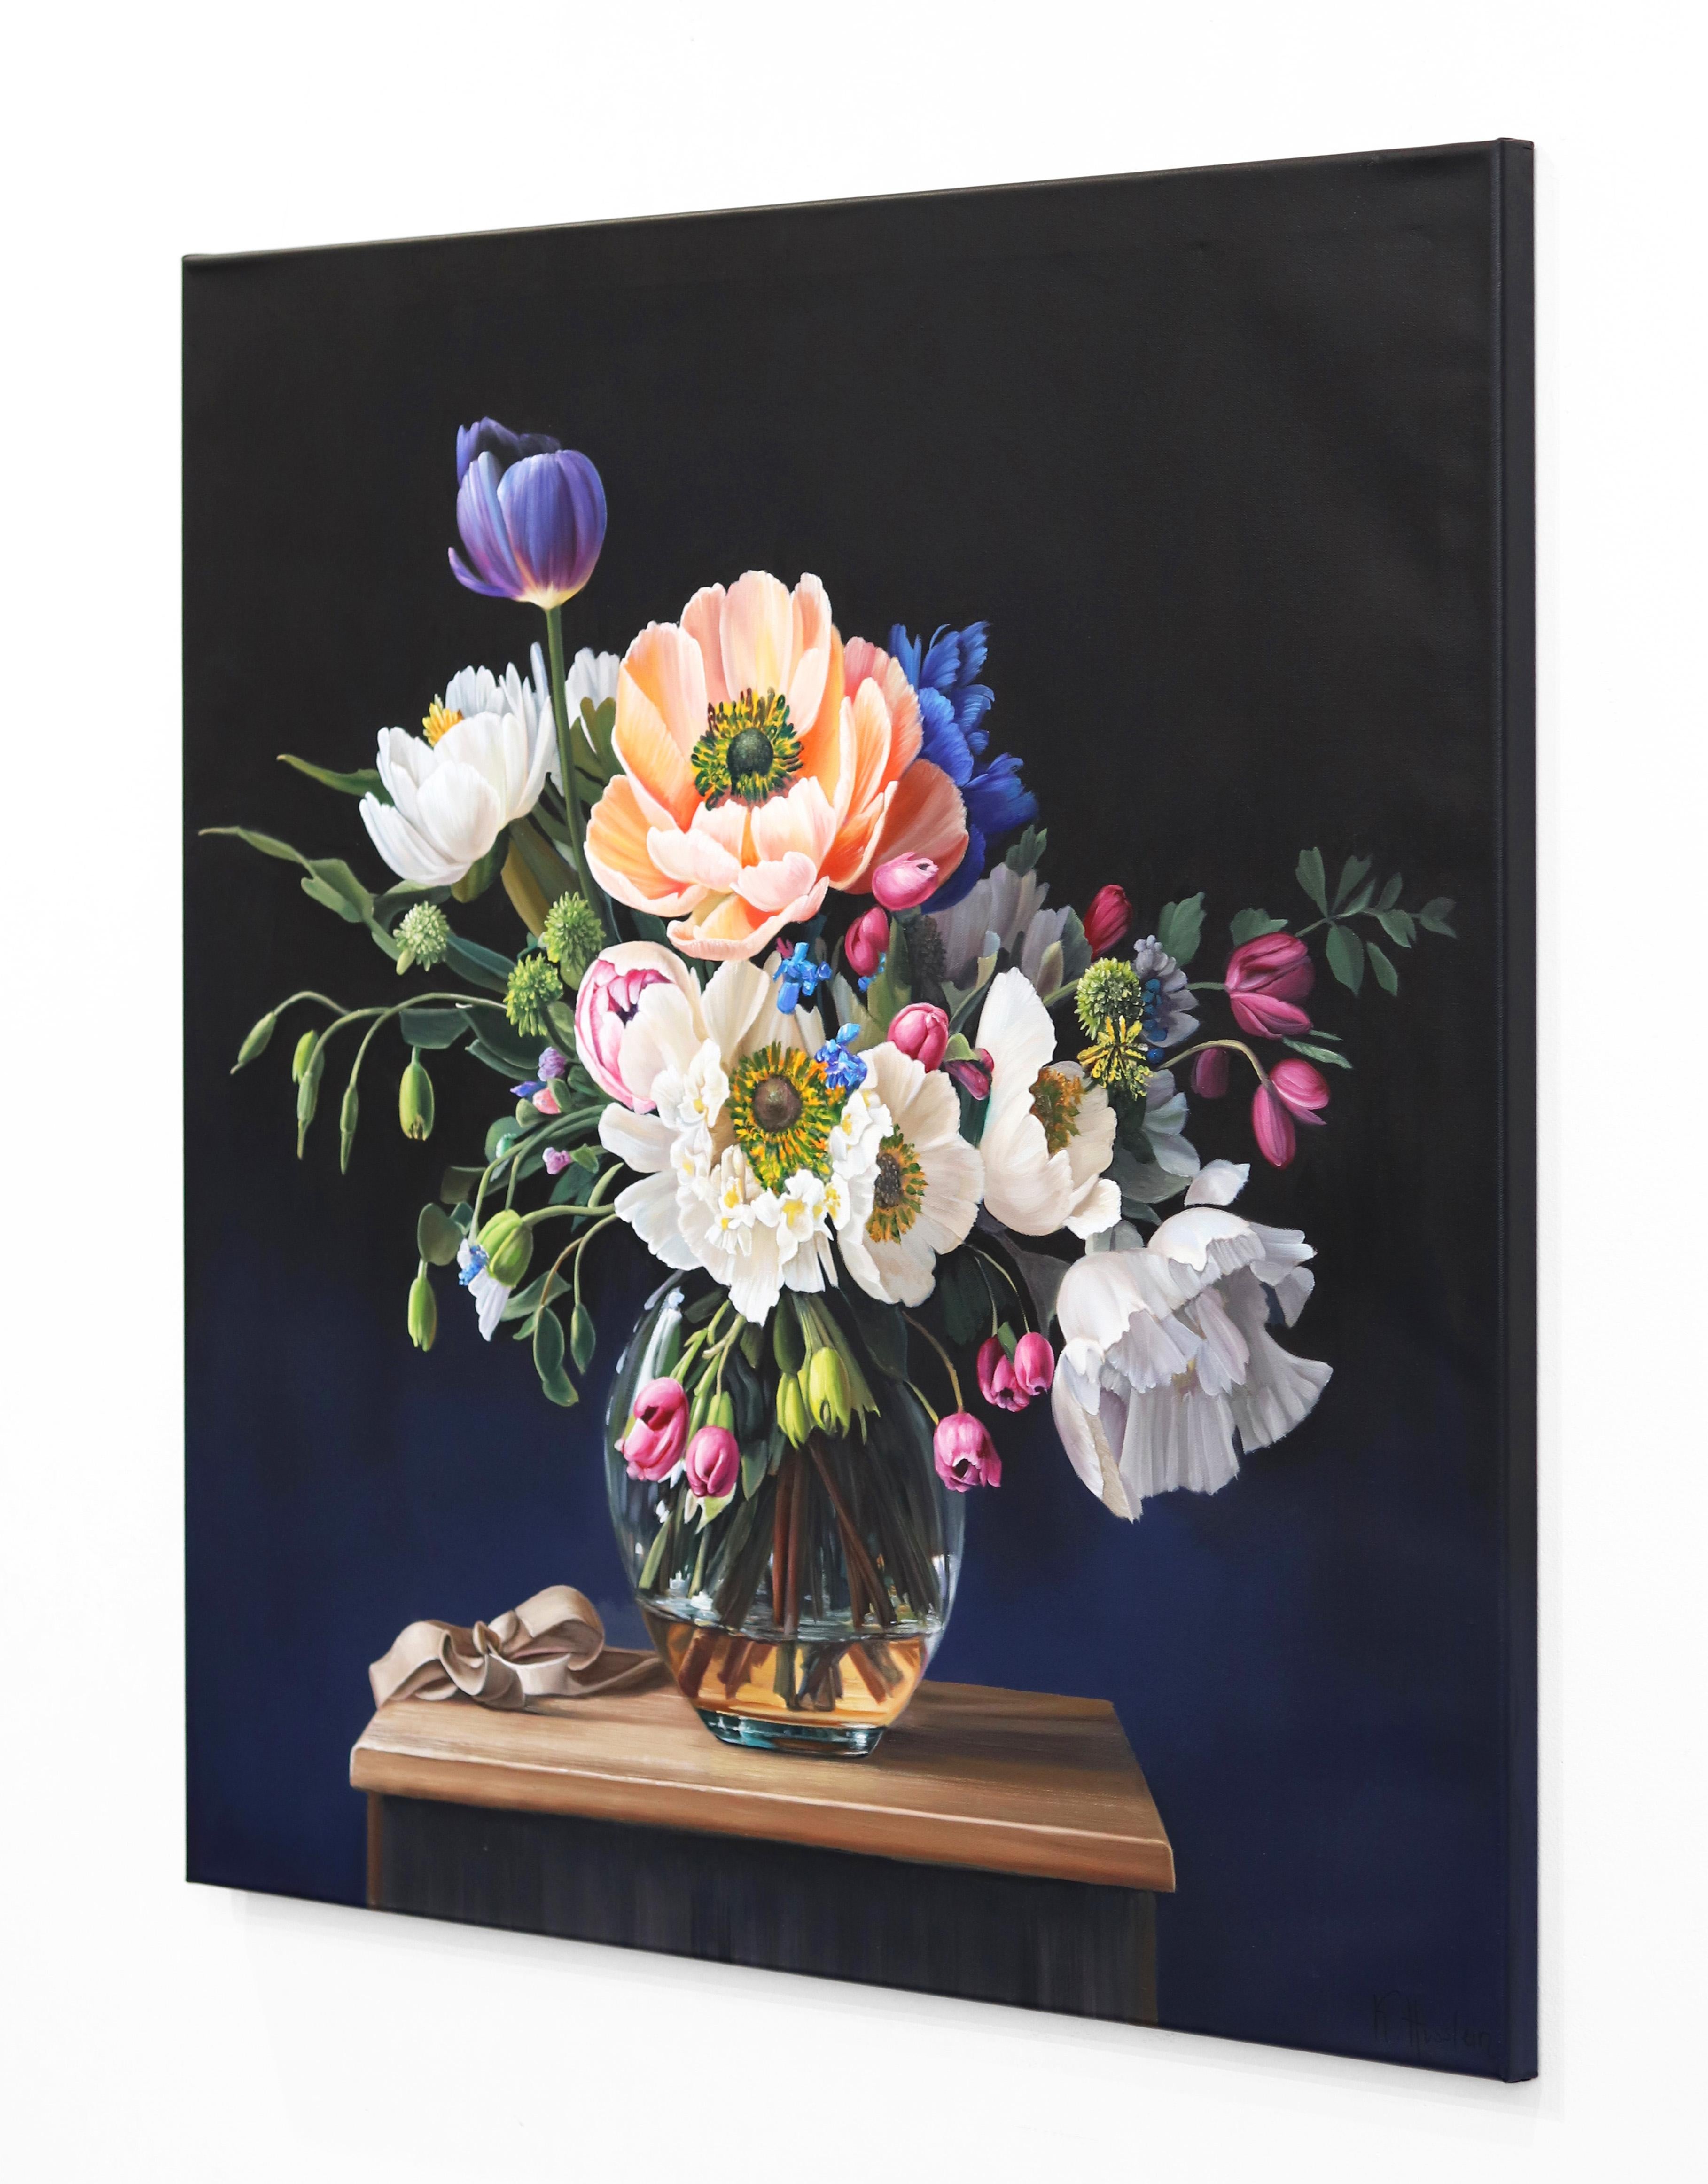 I Have Only My Dreams - Hyperrealist Botanical Floral Still Life Oil Painting 2